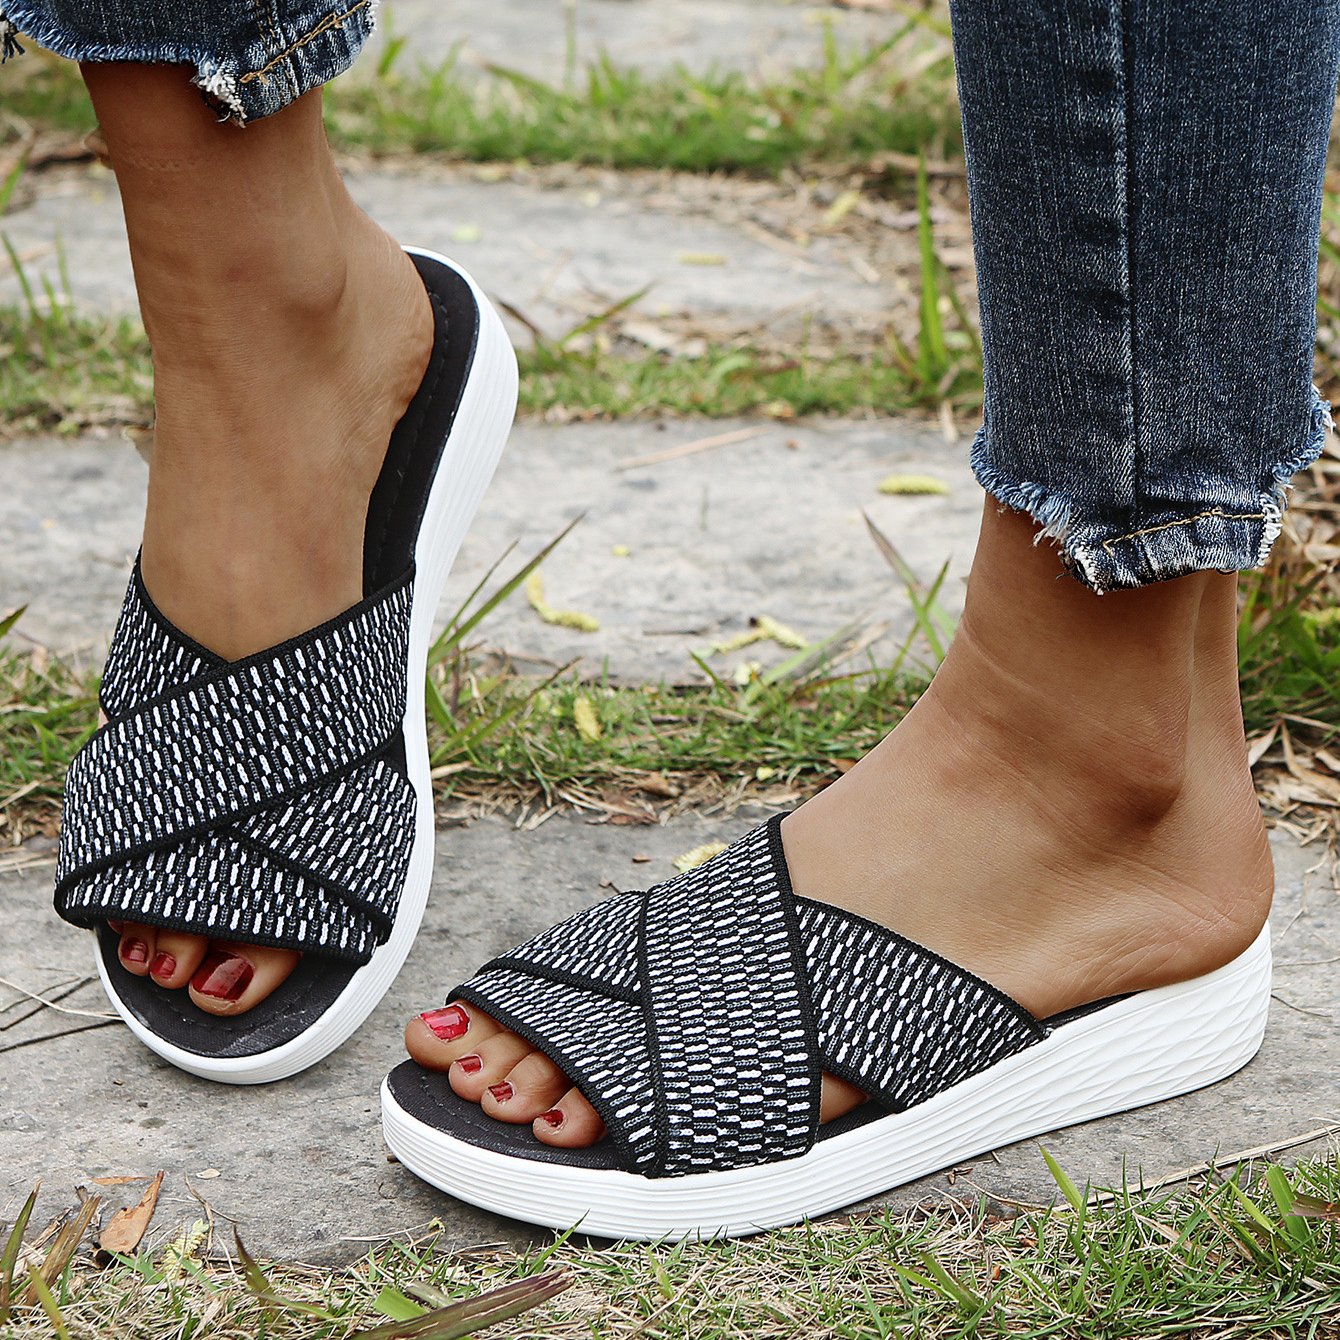 arch support sandals for women